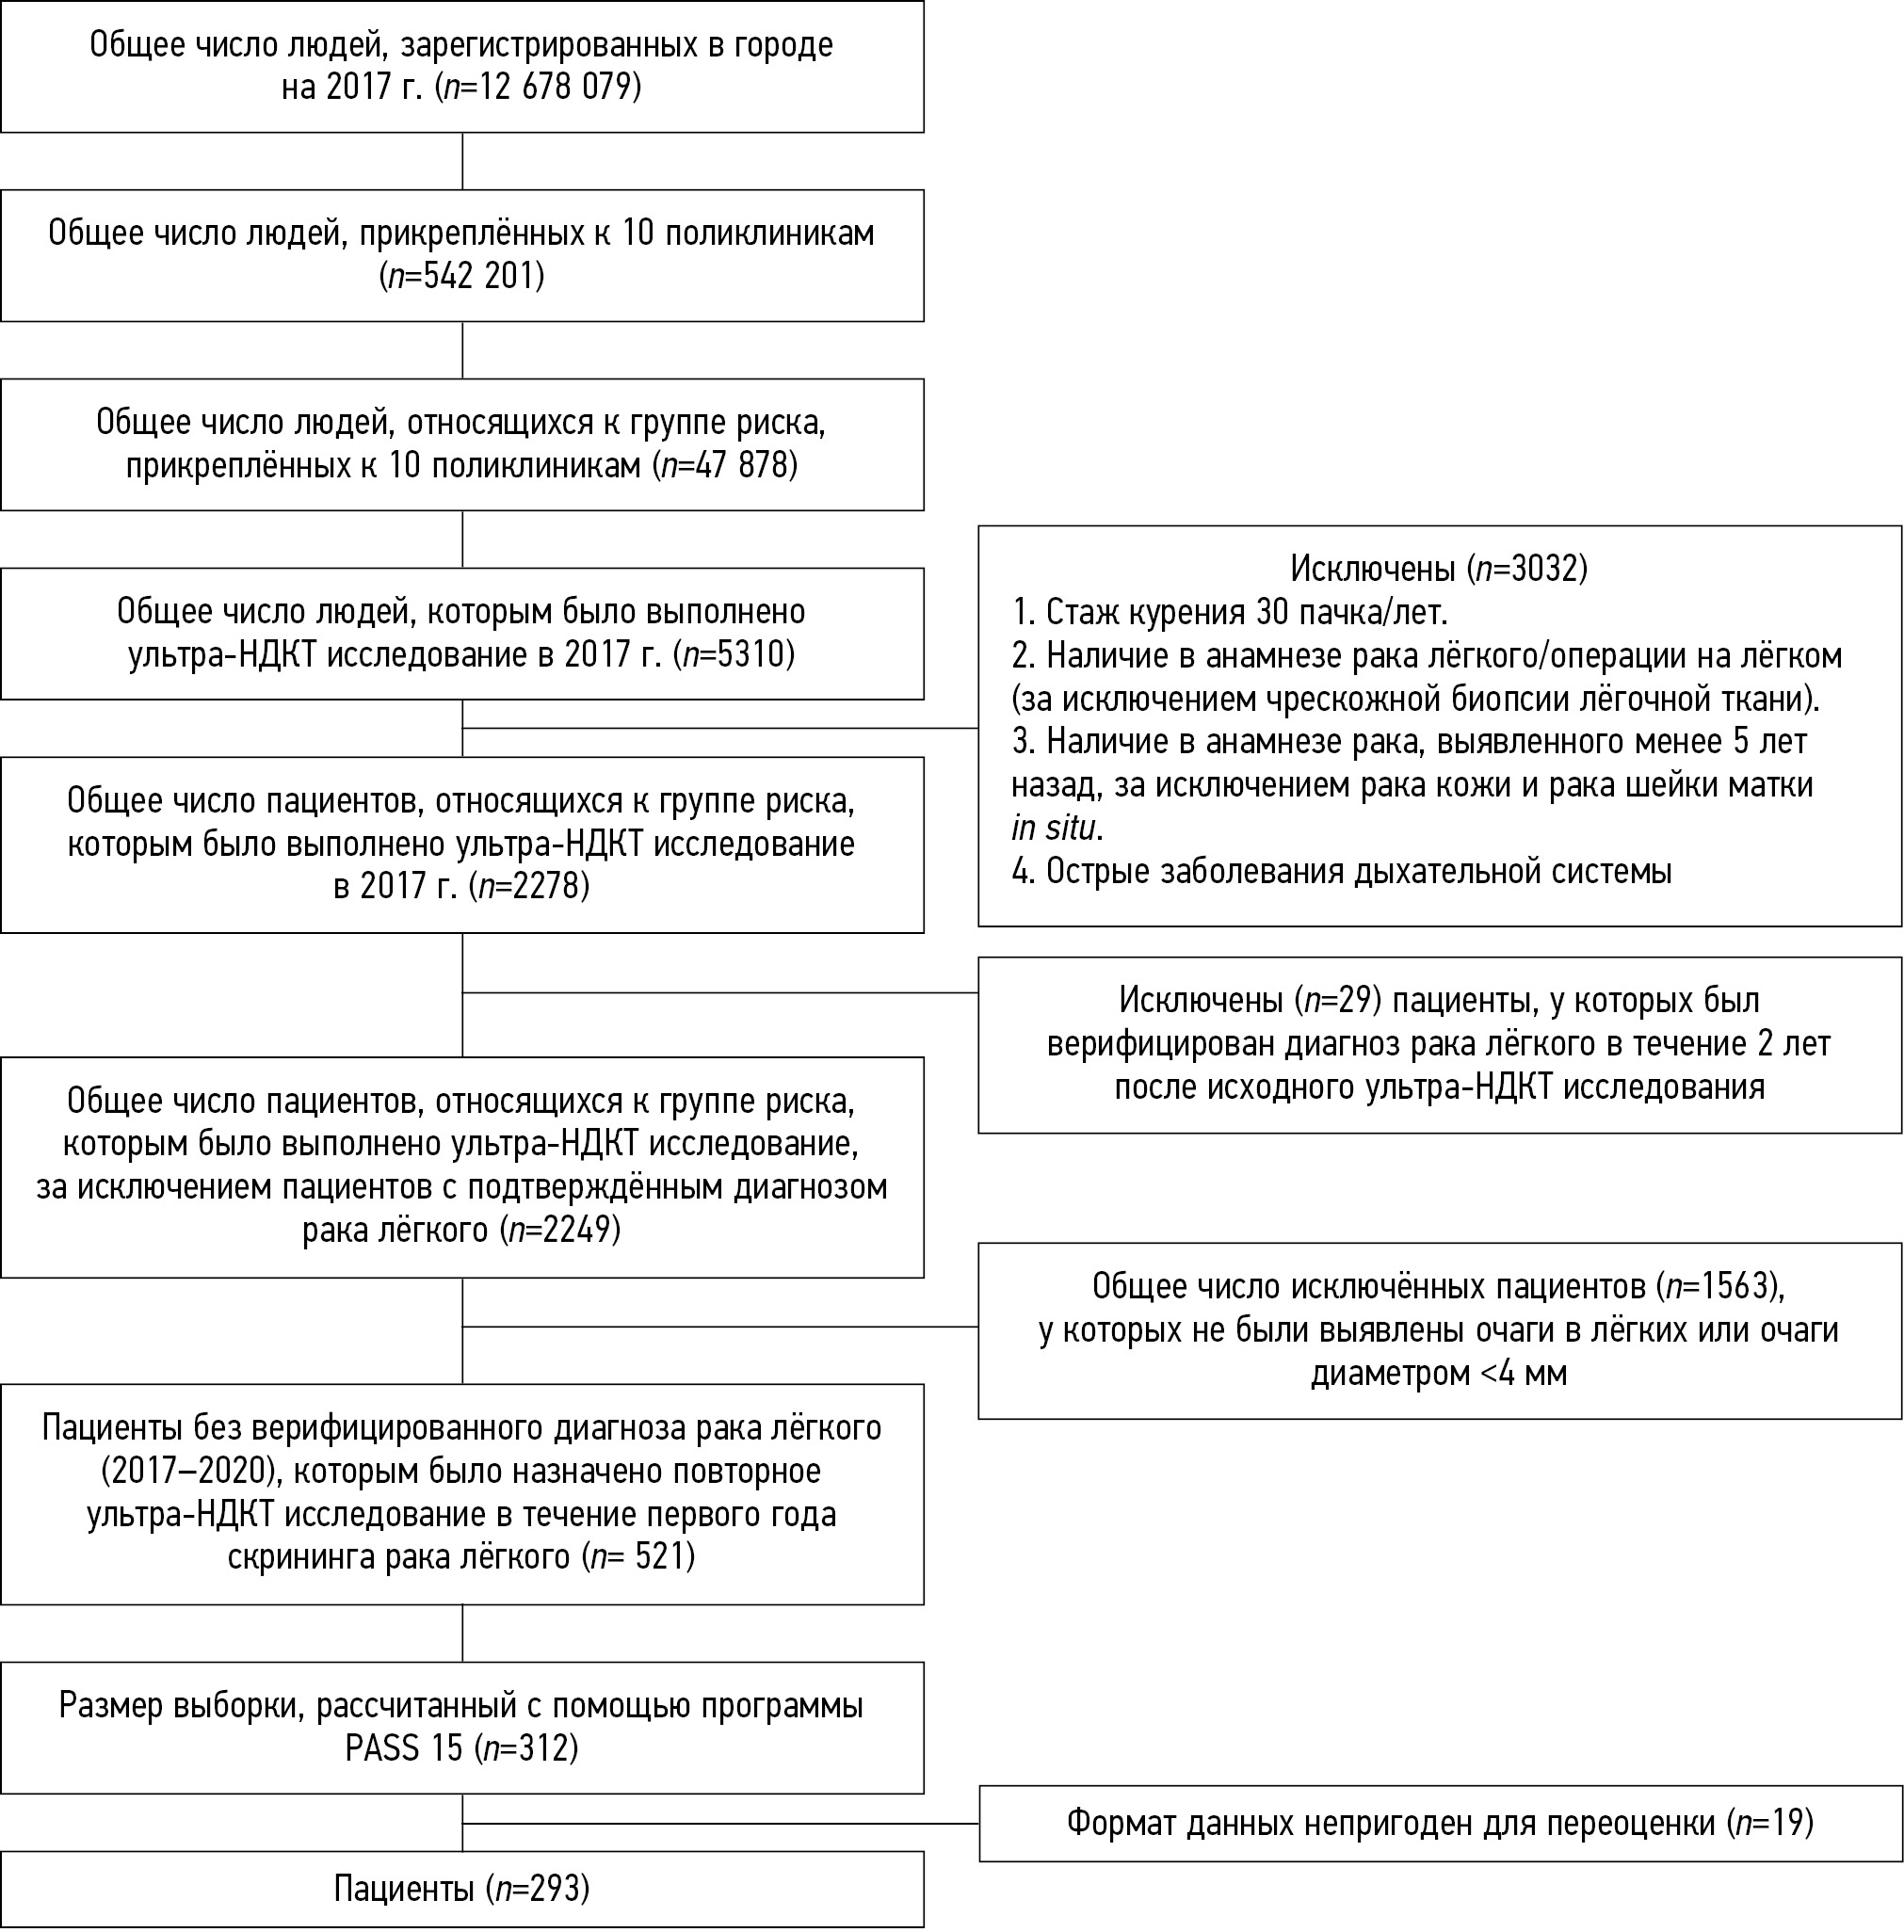 Volumetry versus linear diameter lung nodule measurement: an ultra-low-dose computed tomography lung cancer screening study